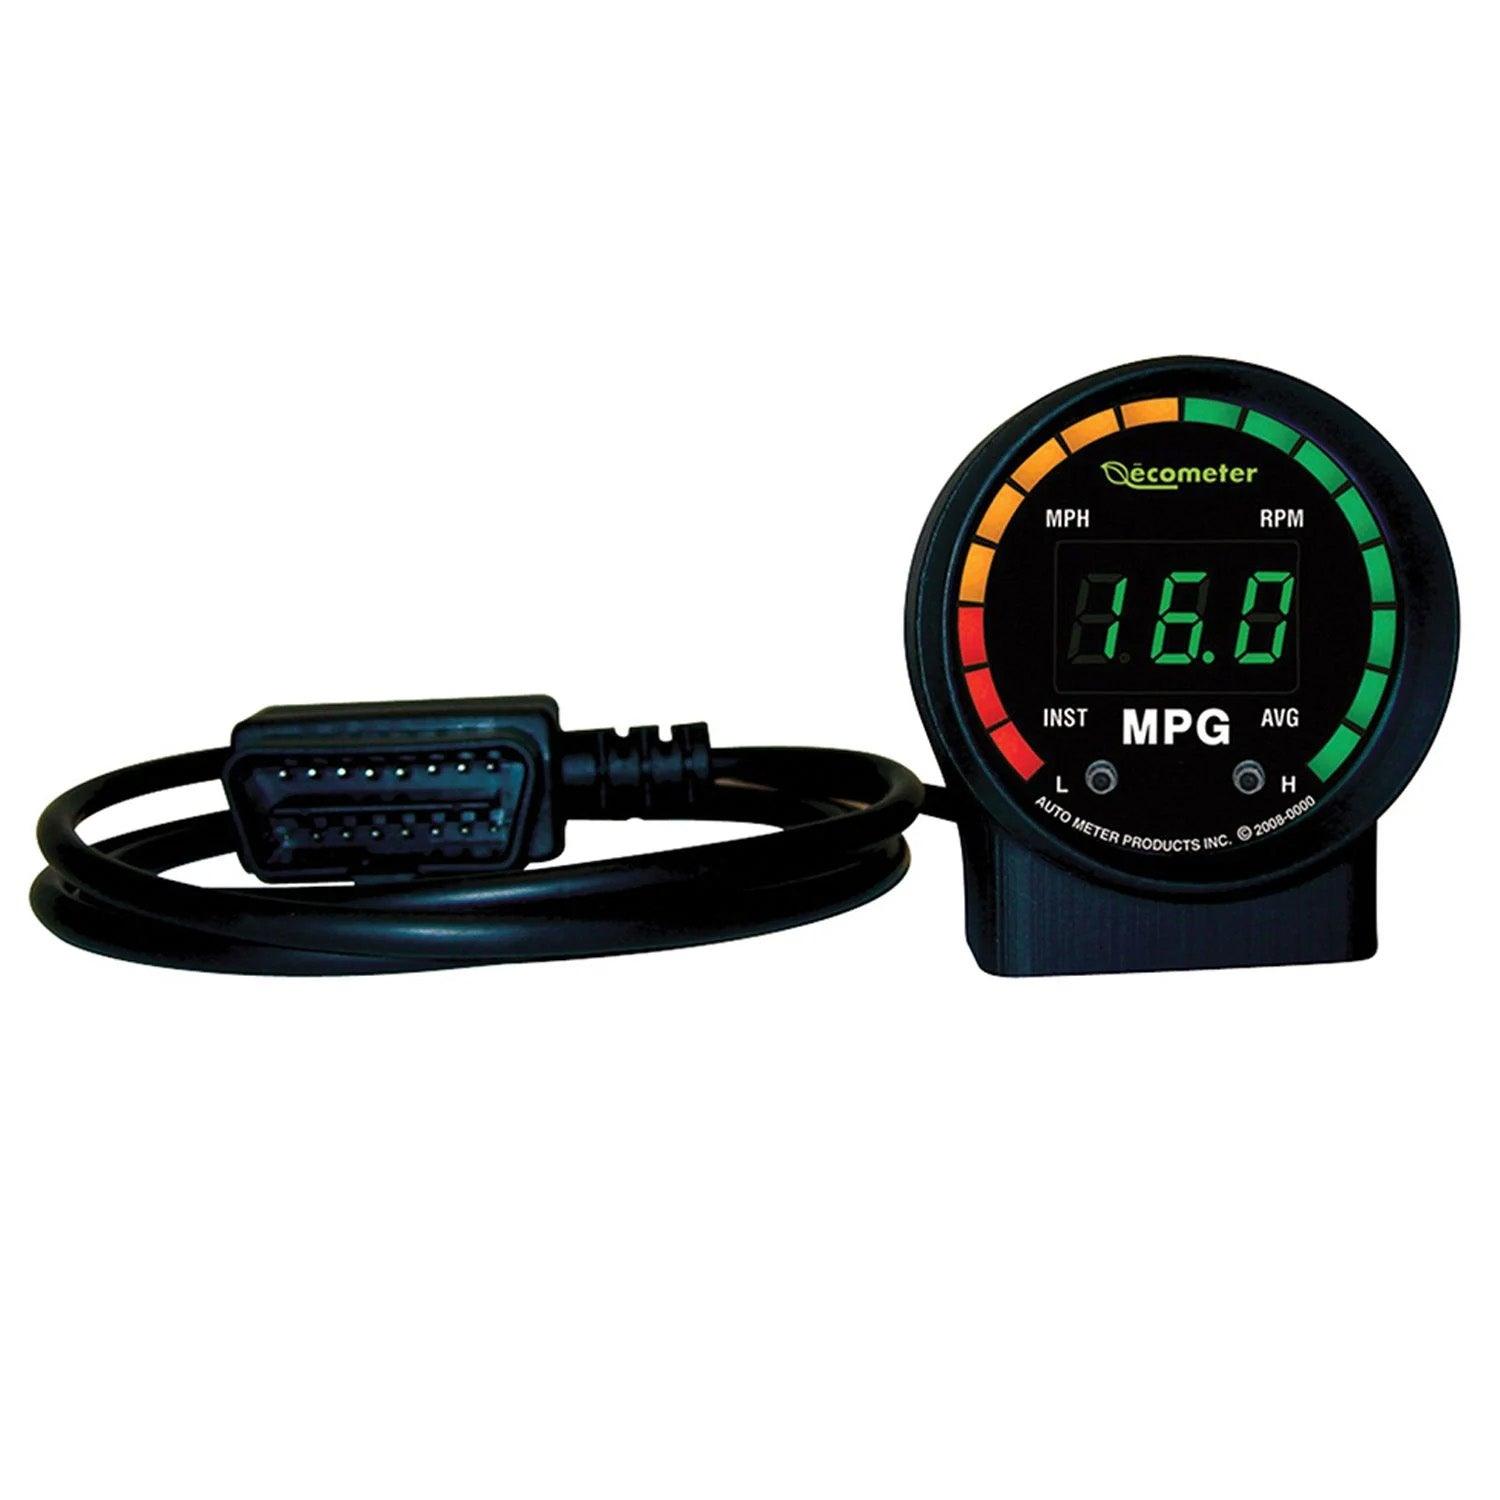 Ecometer/Universal OBDII - Burlile Performance Products